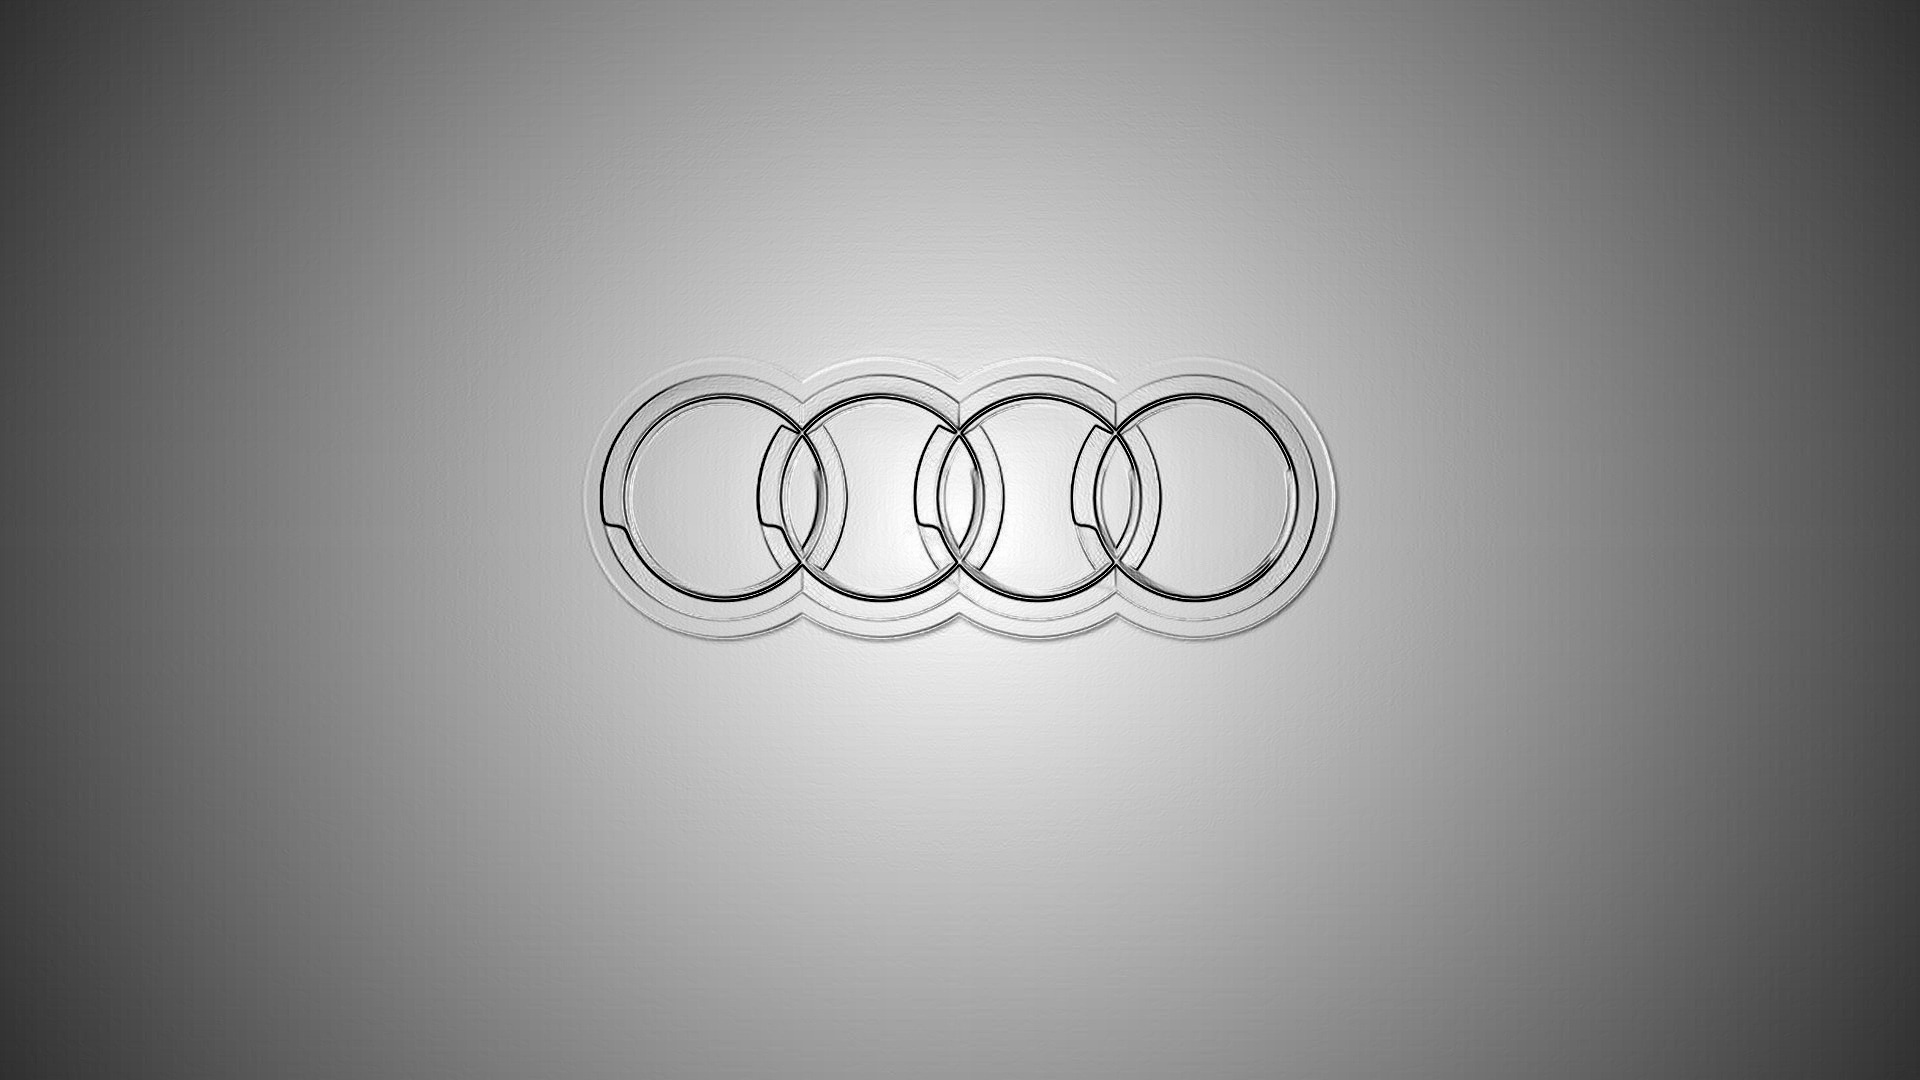 Ultracollect Audi Rings Black Background Image